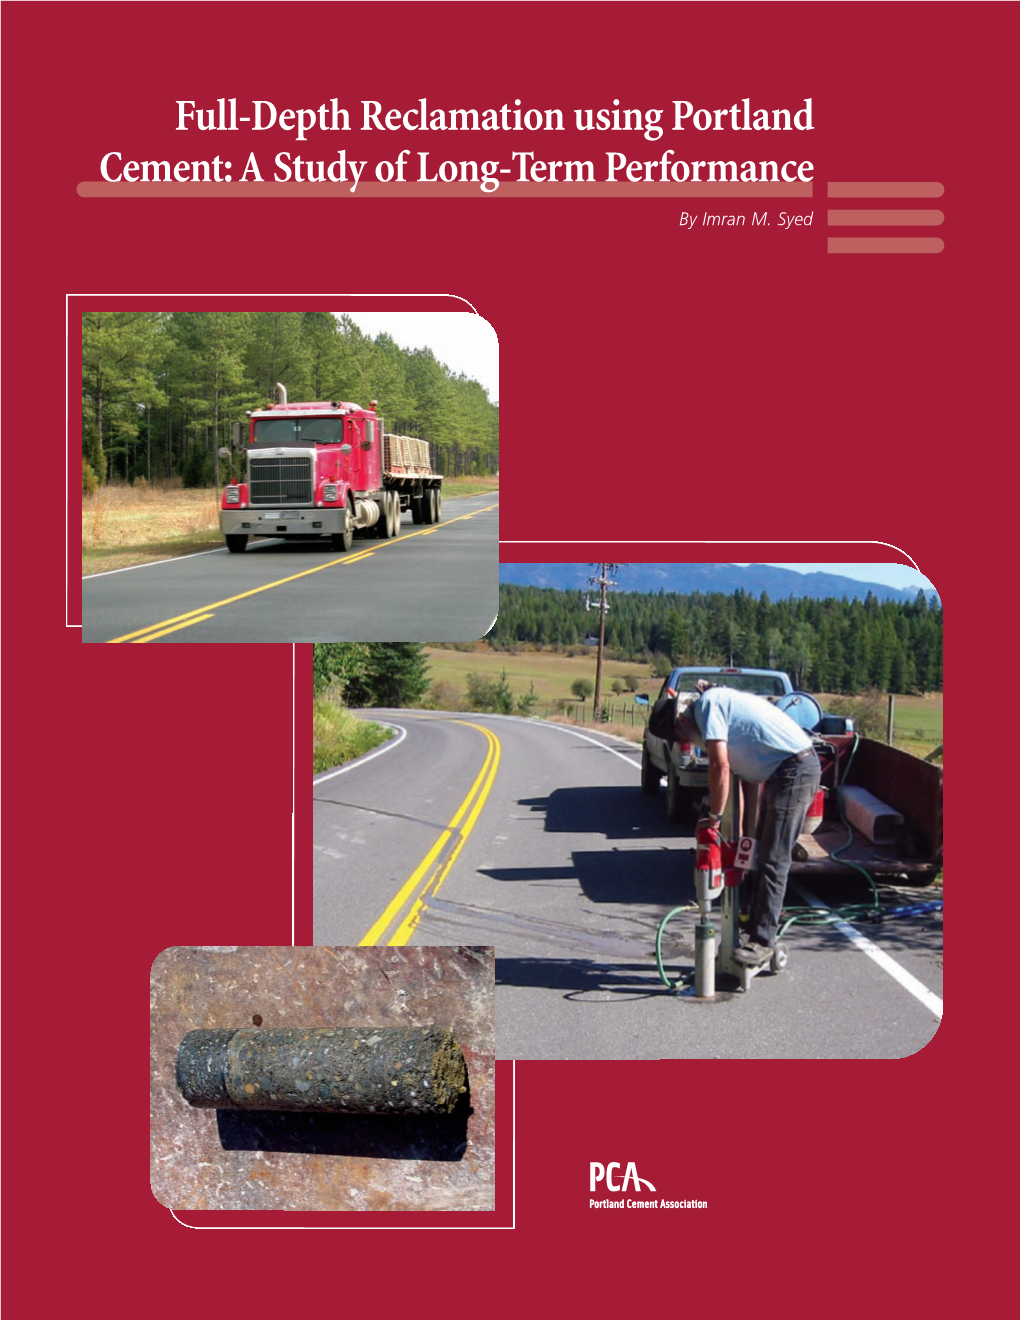 Full-Depth Reclamation Using Portland Cement: a Study of Long-Term Performance by Imran M